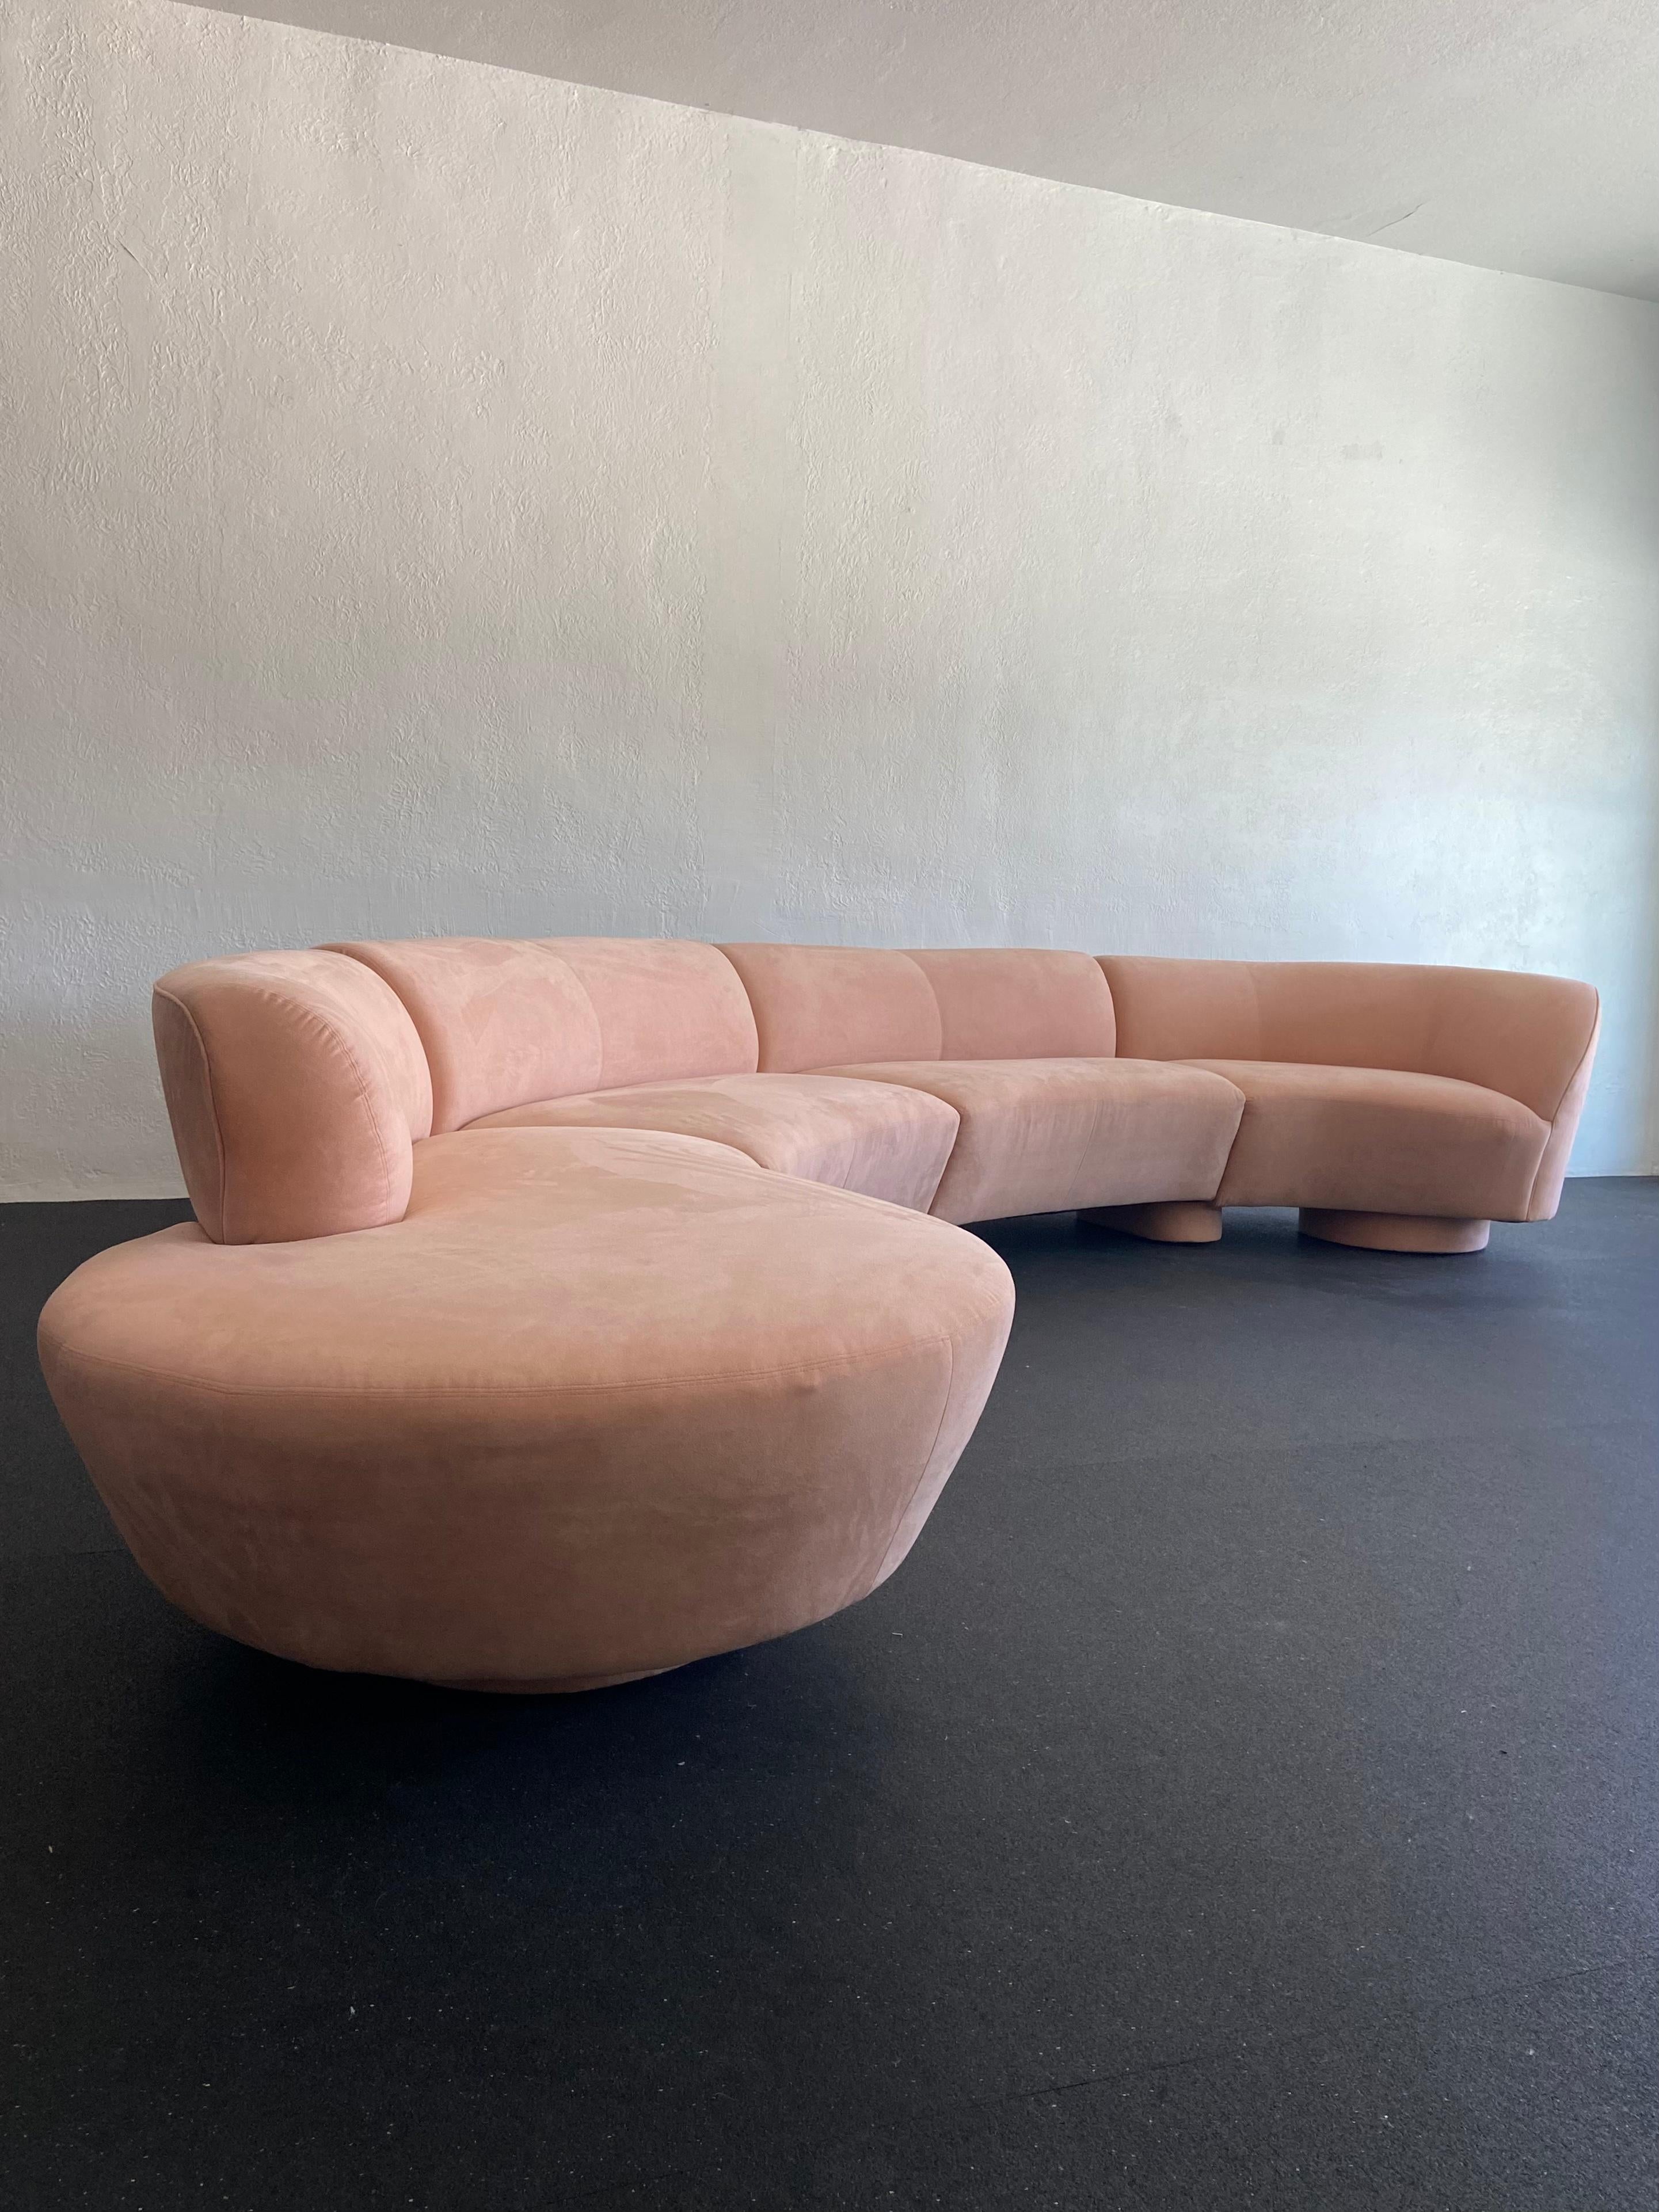 Rare 4-piece serpentine cloud sectional sofa by Vladimir Kagan for directional. Signed. Found in the original blush colored ultra suede upholstery. No rips or tears present. Current upholstery would be salvageable with a cleaning or reupholstery